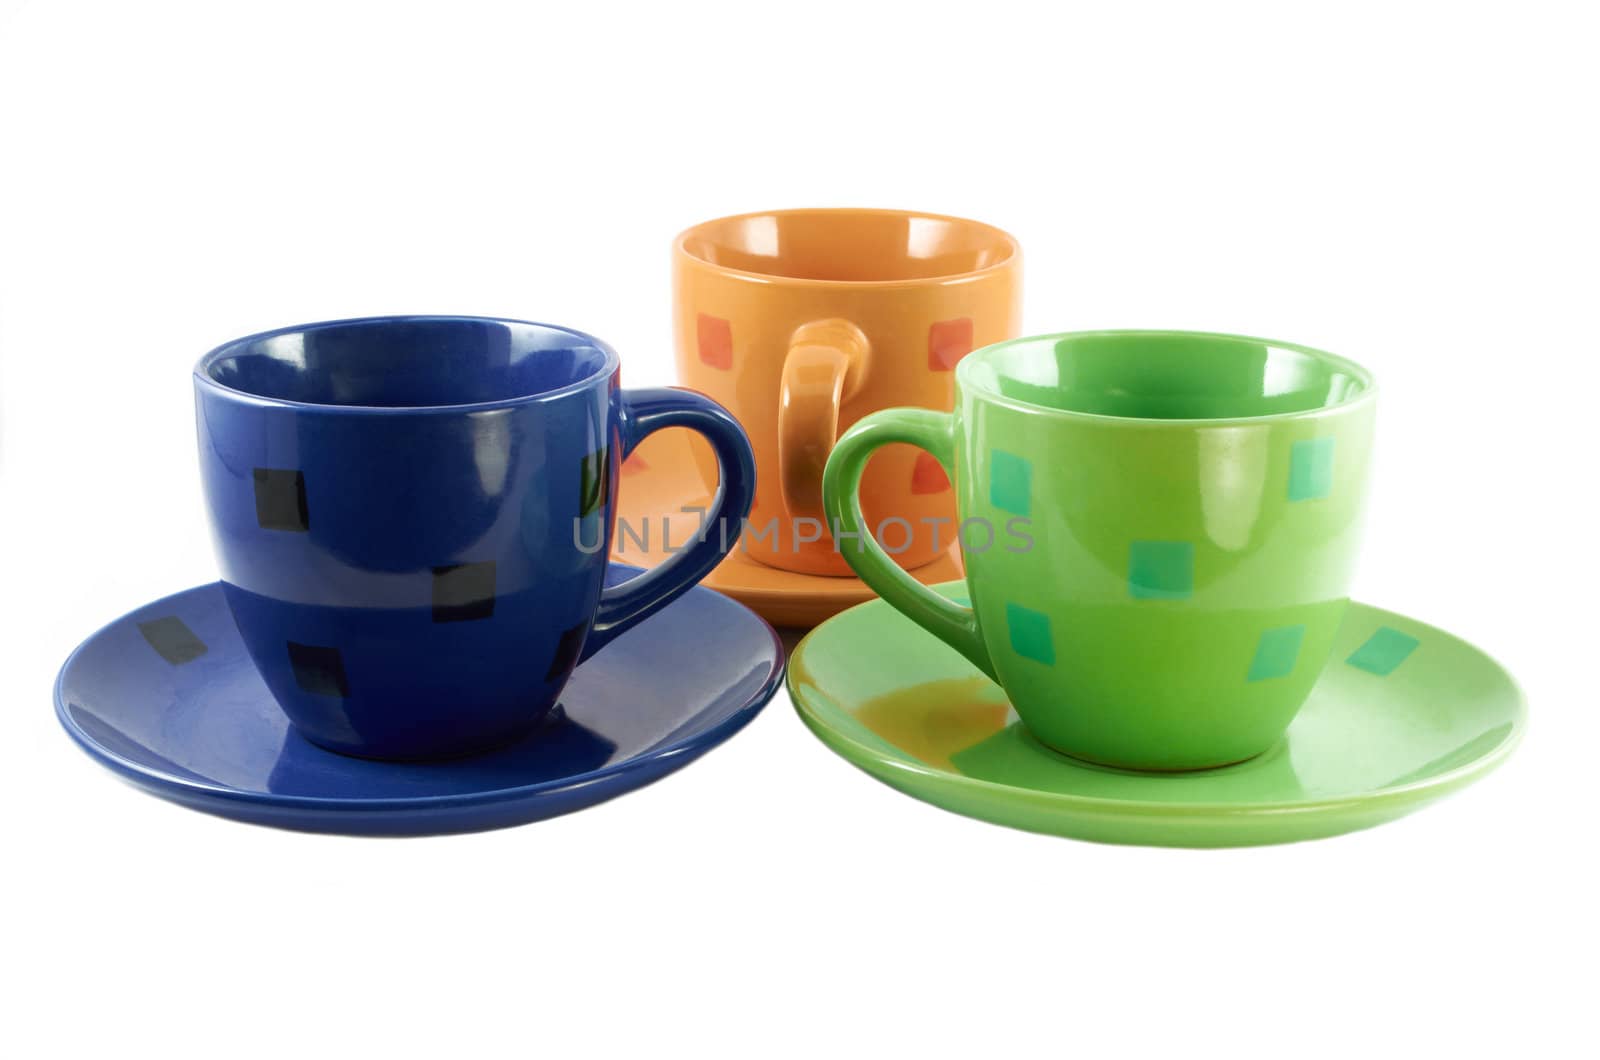 Colorful ceramic cups for tea on a saucer isolated on white background